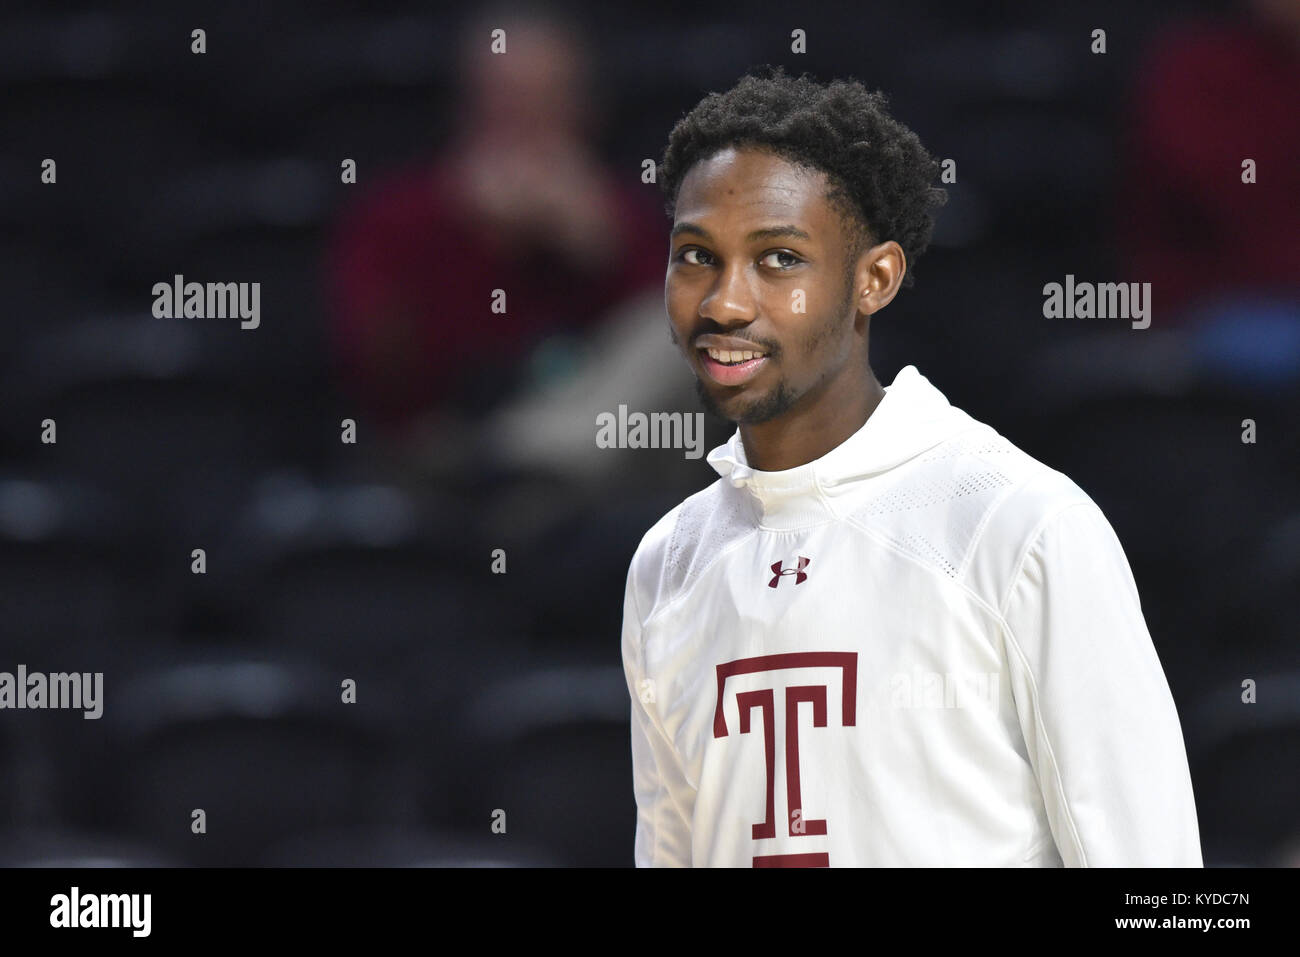 Philadelphia, Pennsylvania, USA. 13th Jan, 2018. Temple Owls guard SHIZZ ALSTON JR. (3) shown prior to the American Athletic Conference basketball game being played at the Liacouras Center in Philadelphia. Memphis beat Temple 75-72 in overtime Credit: Ken Inness/ZUMA Wire/Alamy Live News Stock Photo